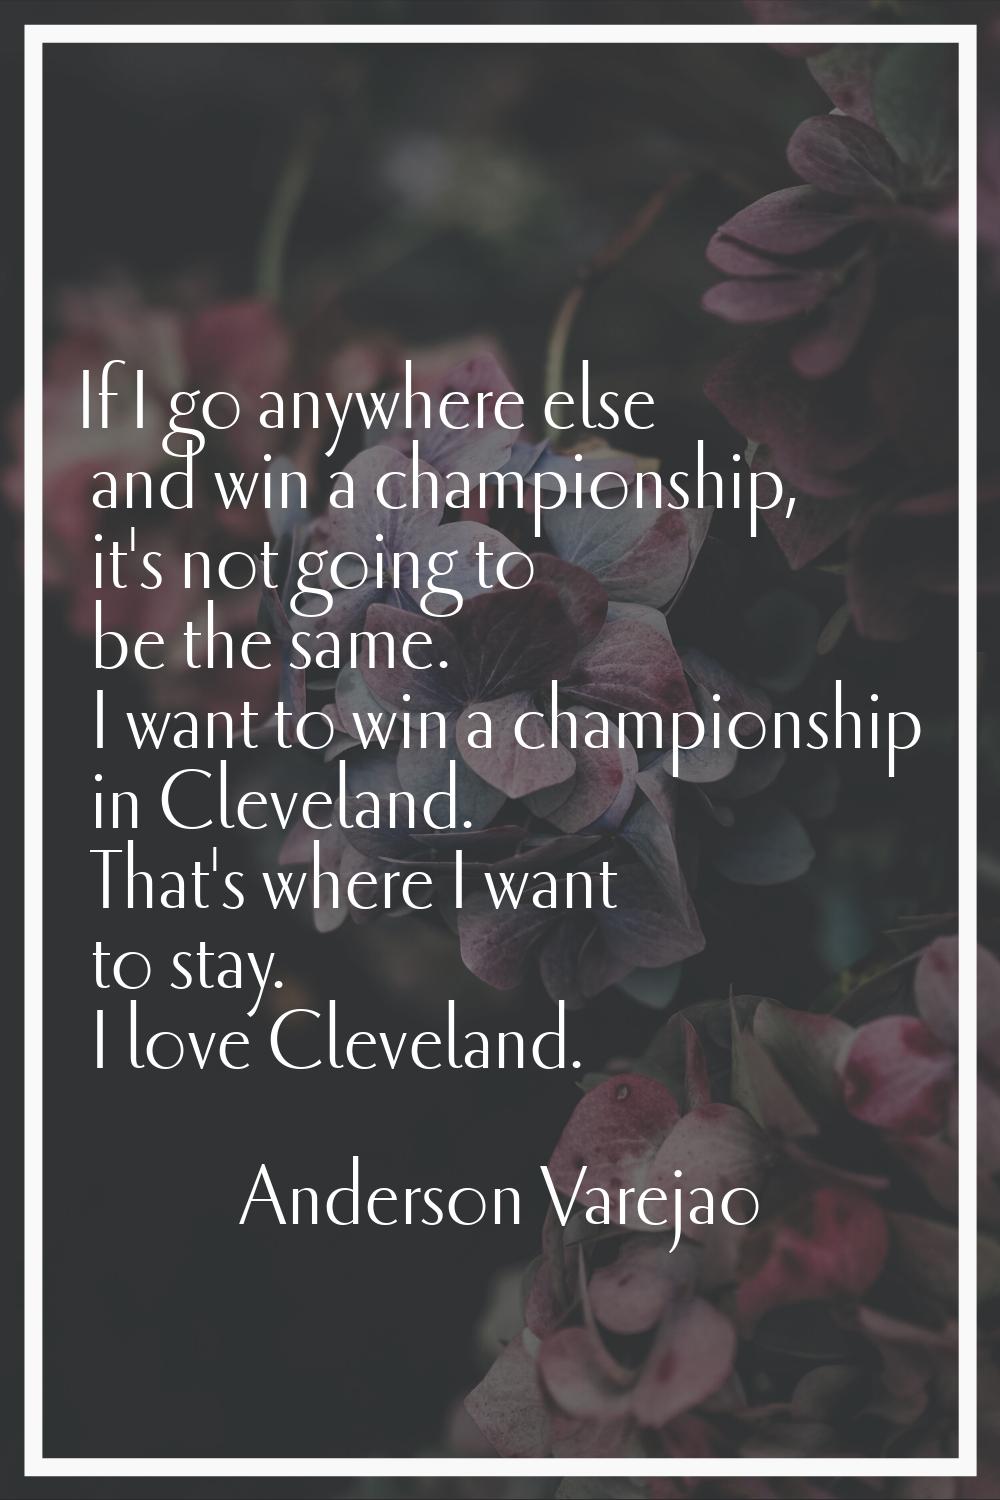 If I go anywhere else and win a championship, it's not going to be the same. I want to win a champi